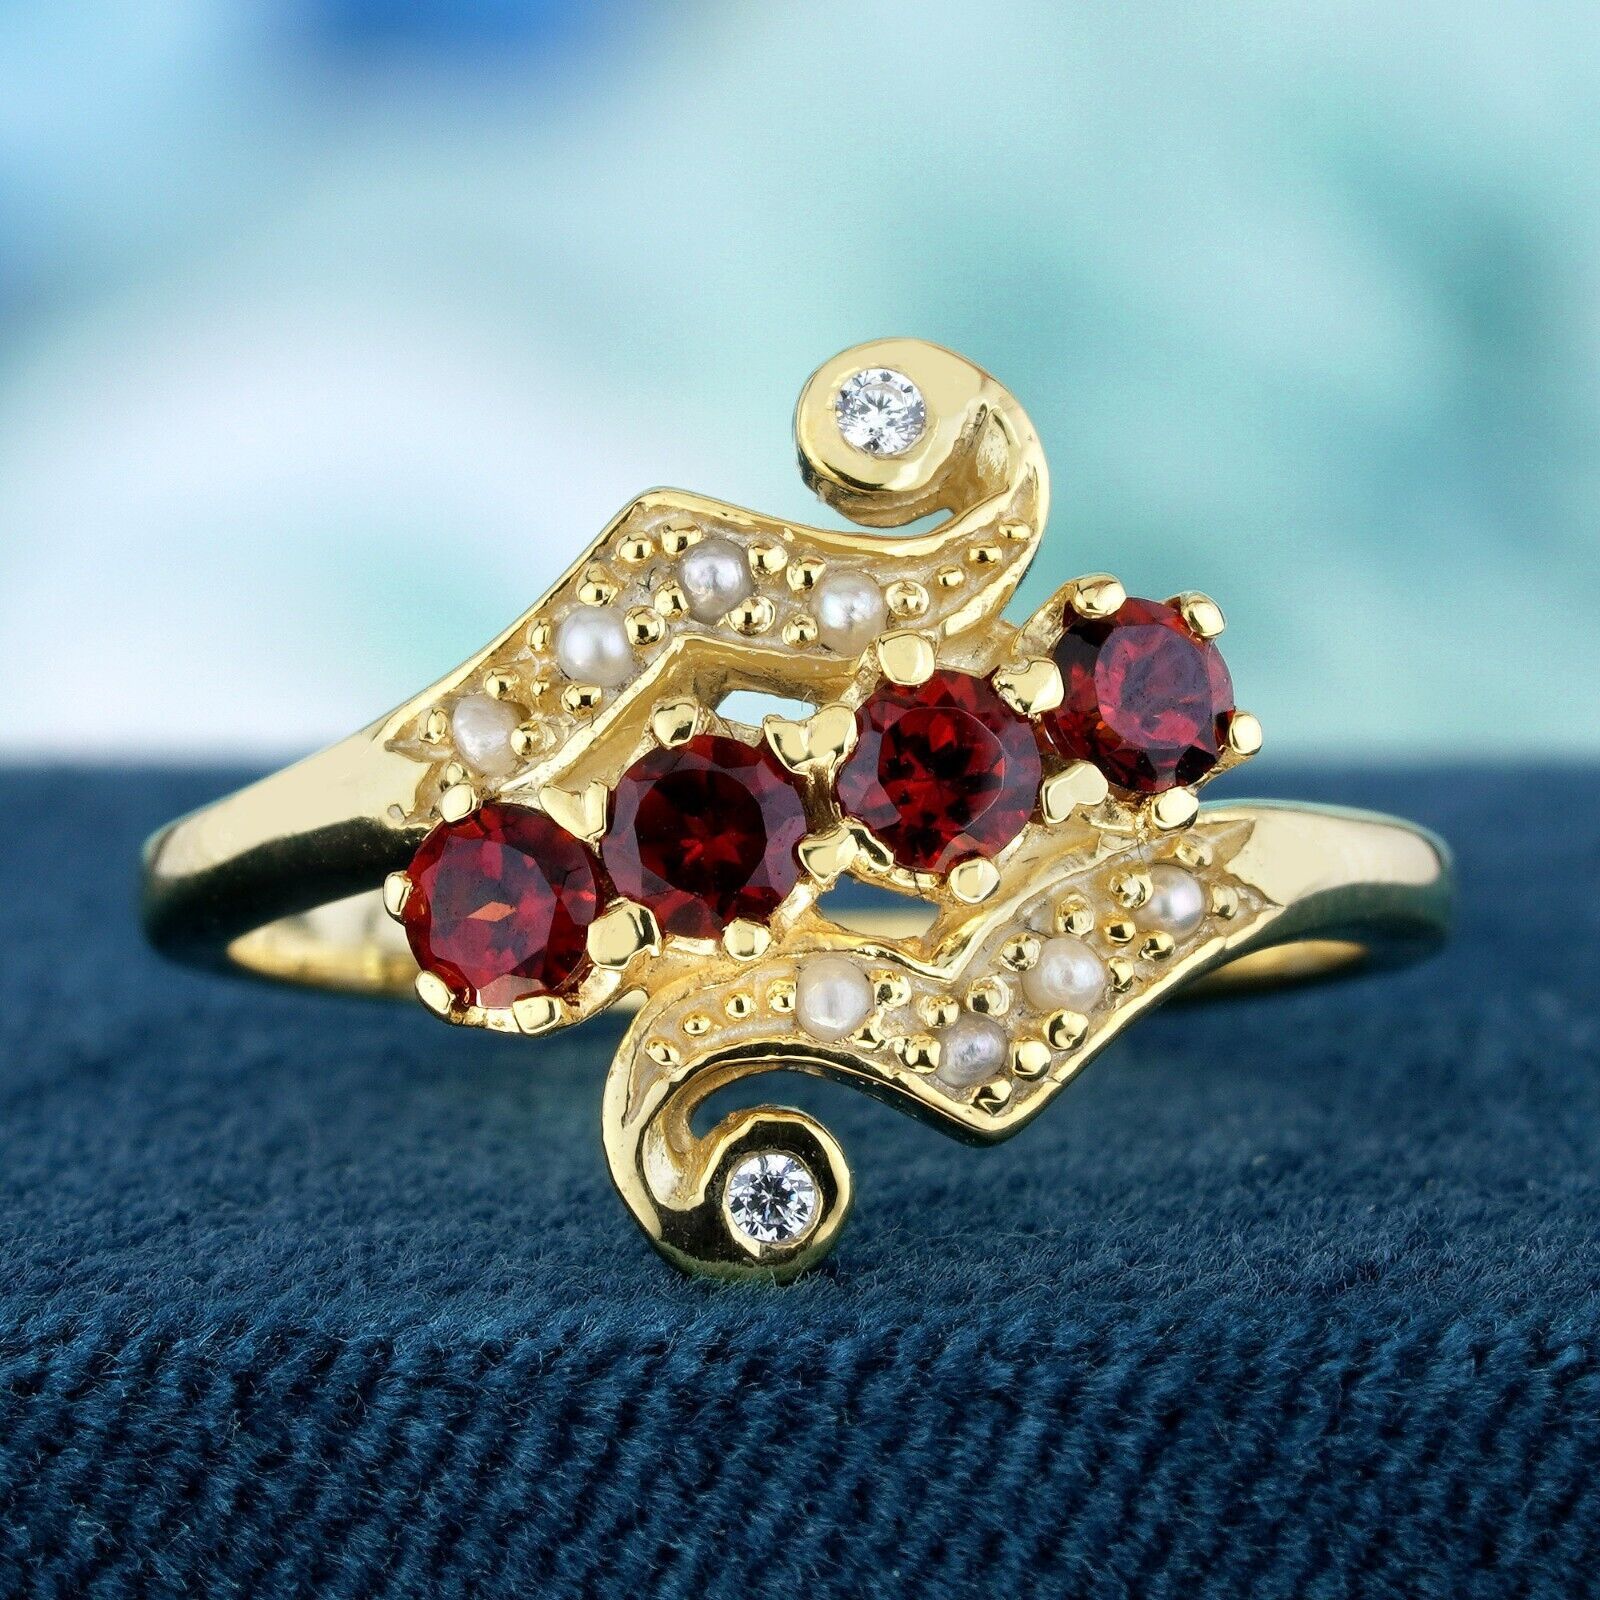 Primary image for Natural Garnet Pearl Diamond Vintage Style Ring in Solid 9K Yellow Gold